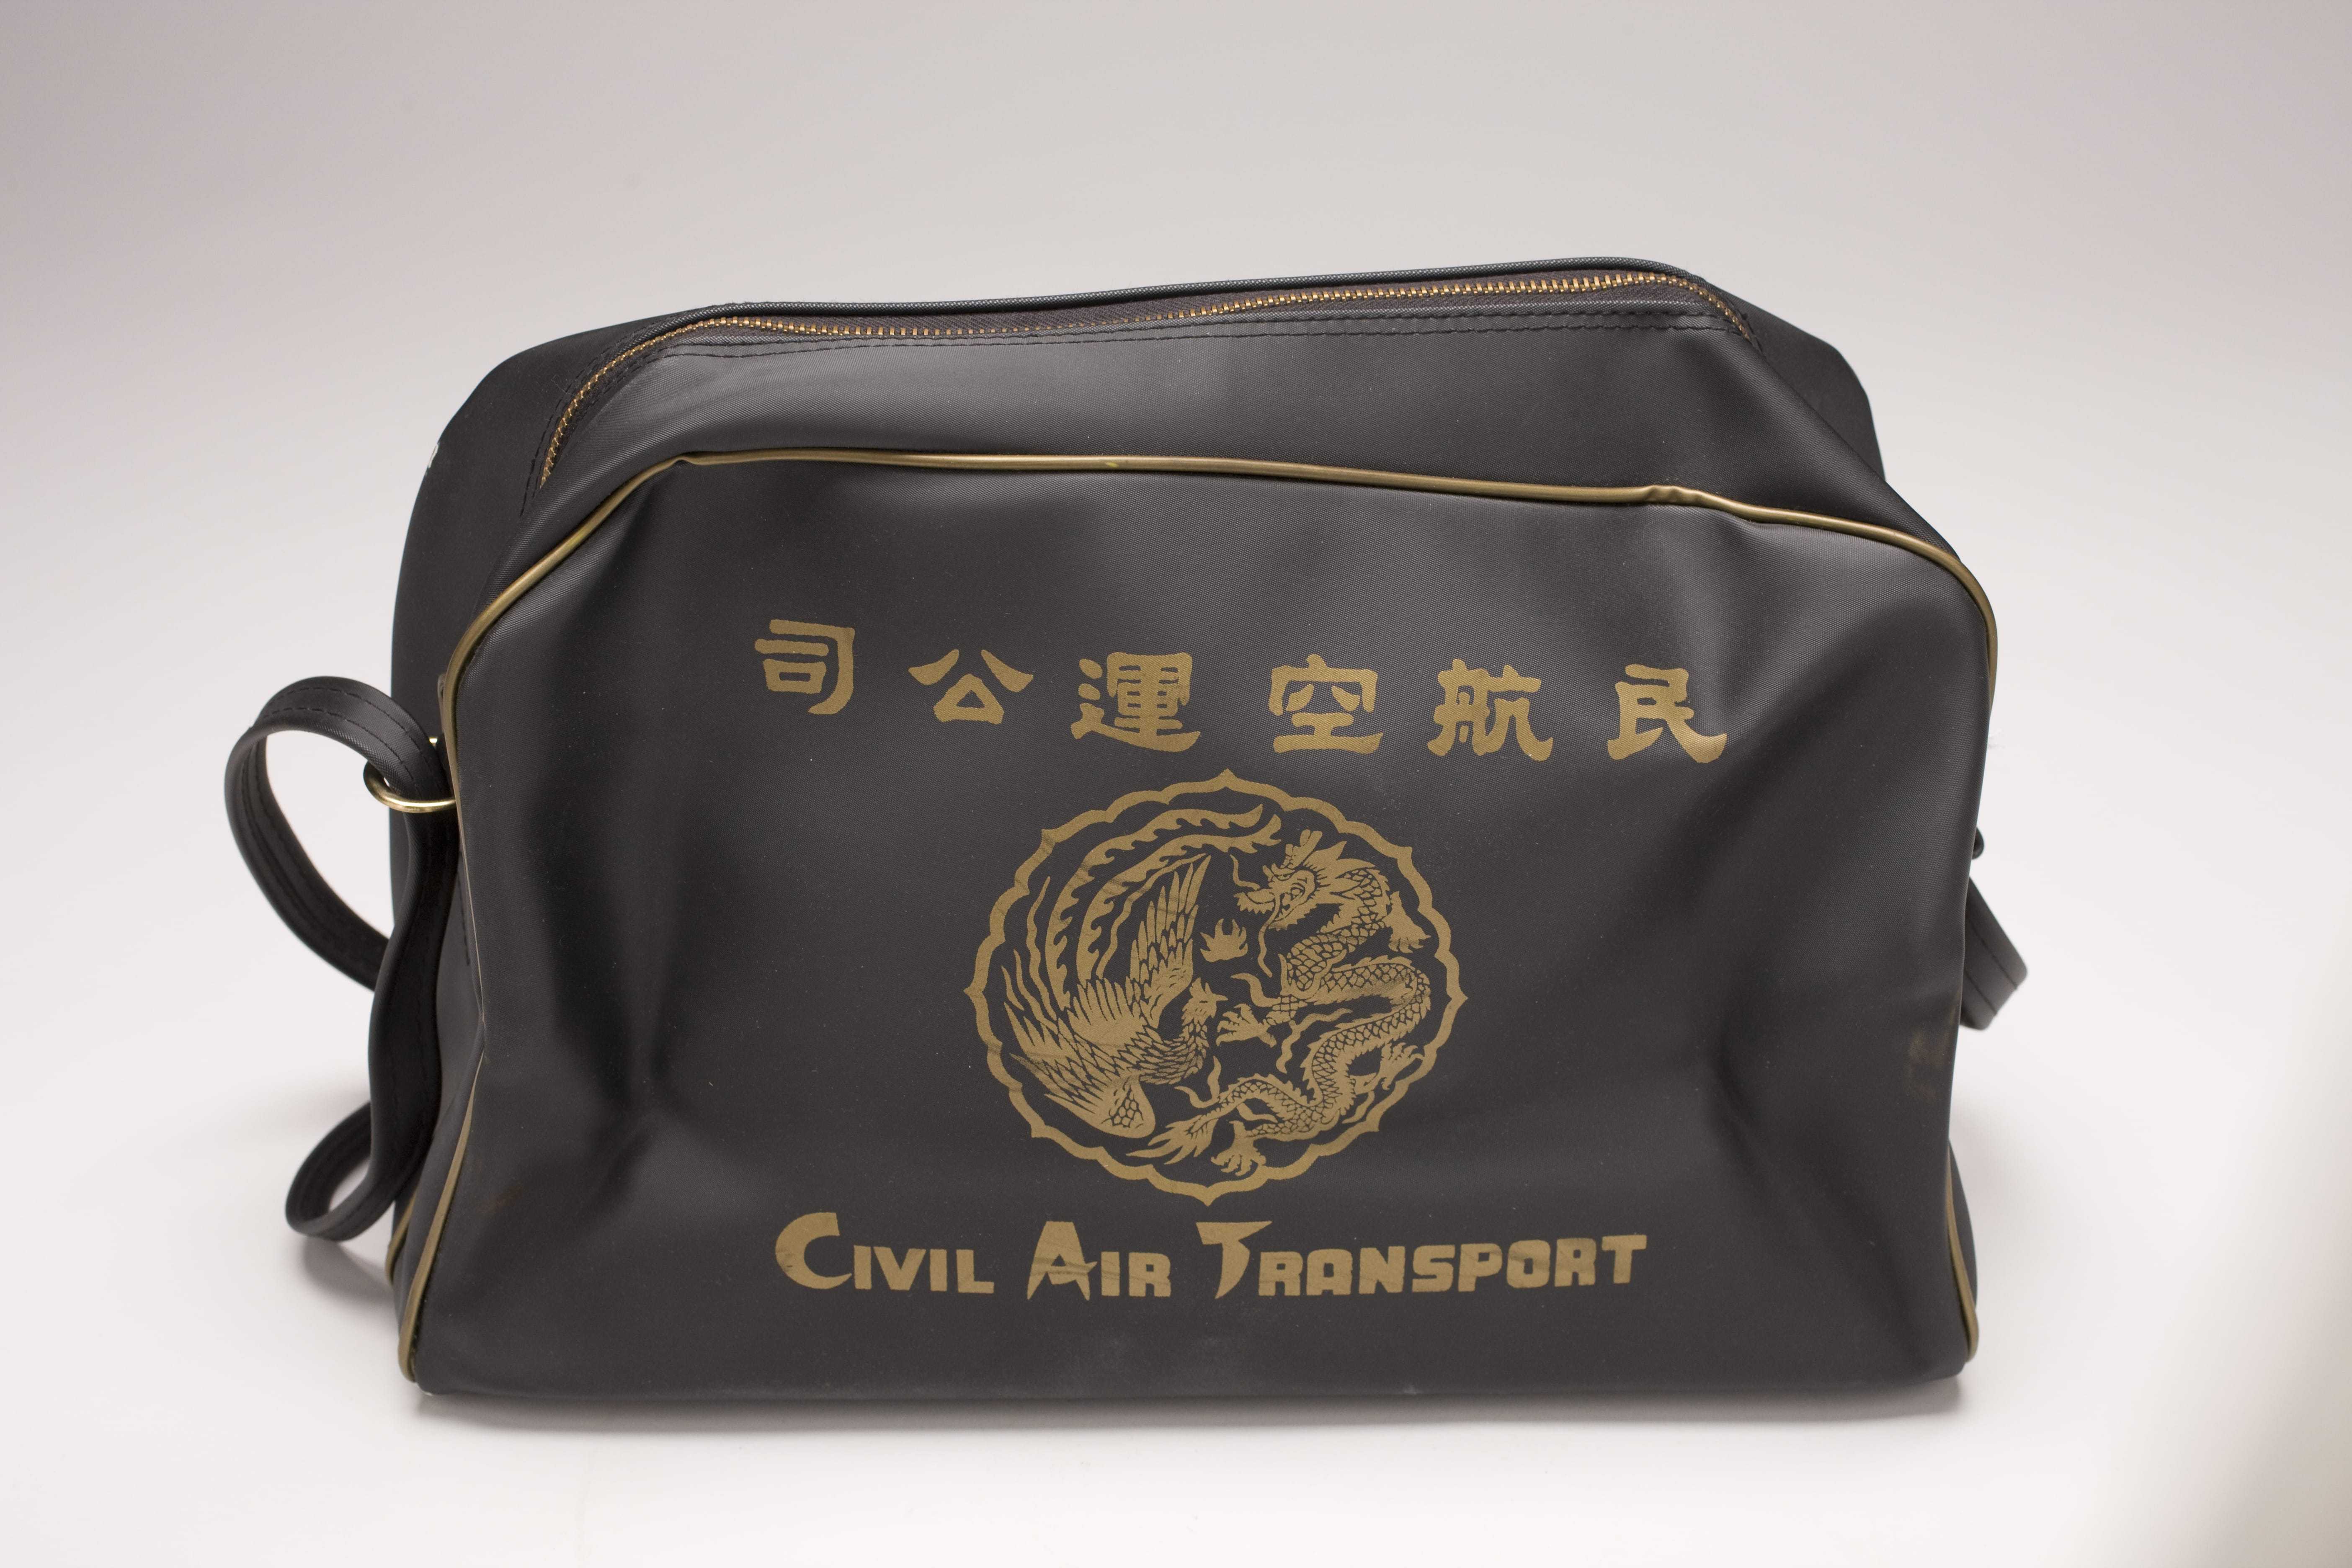 A black zippered bag with the CAT logo printed in gold on the side